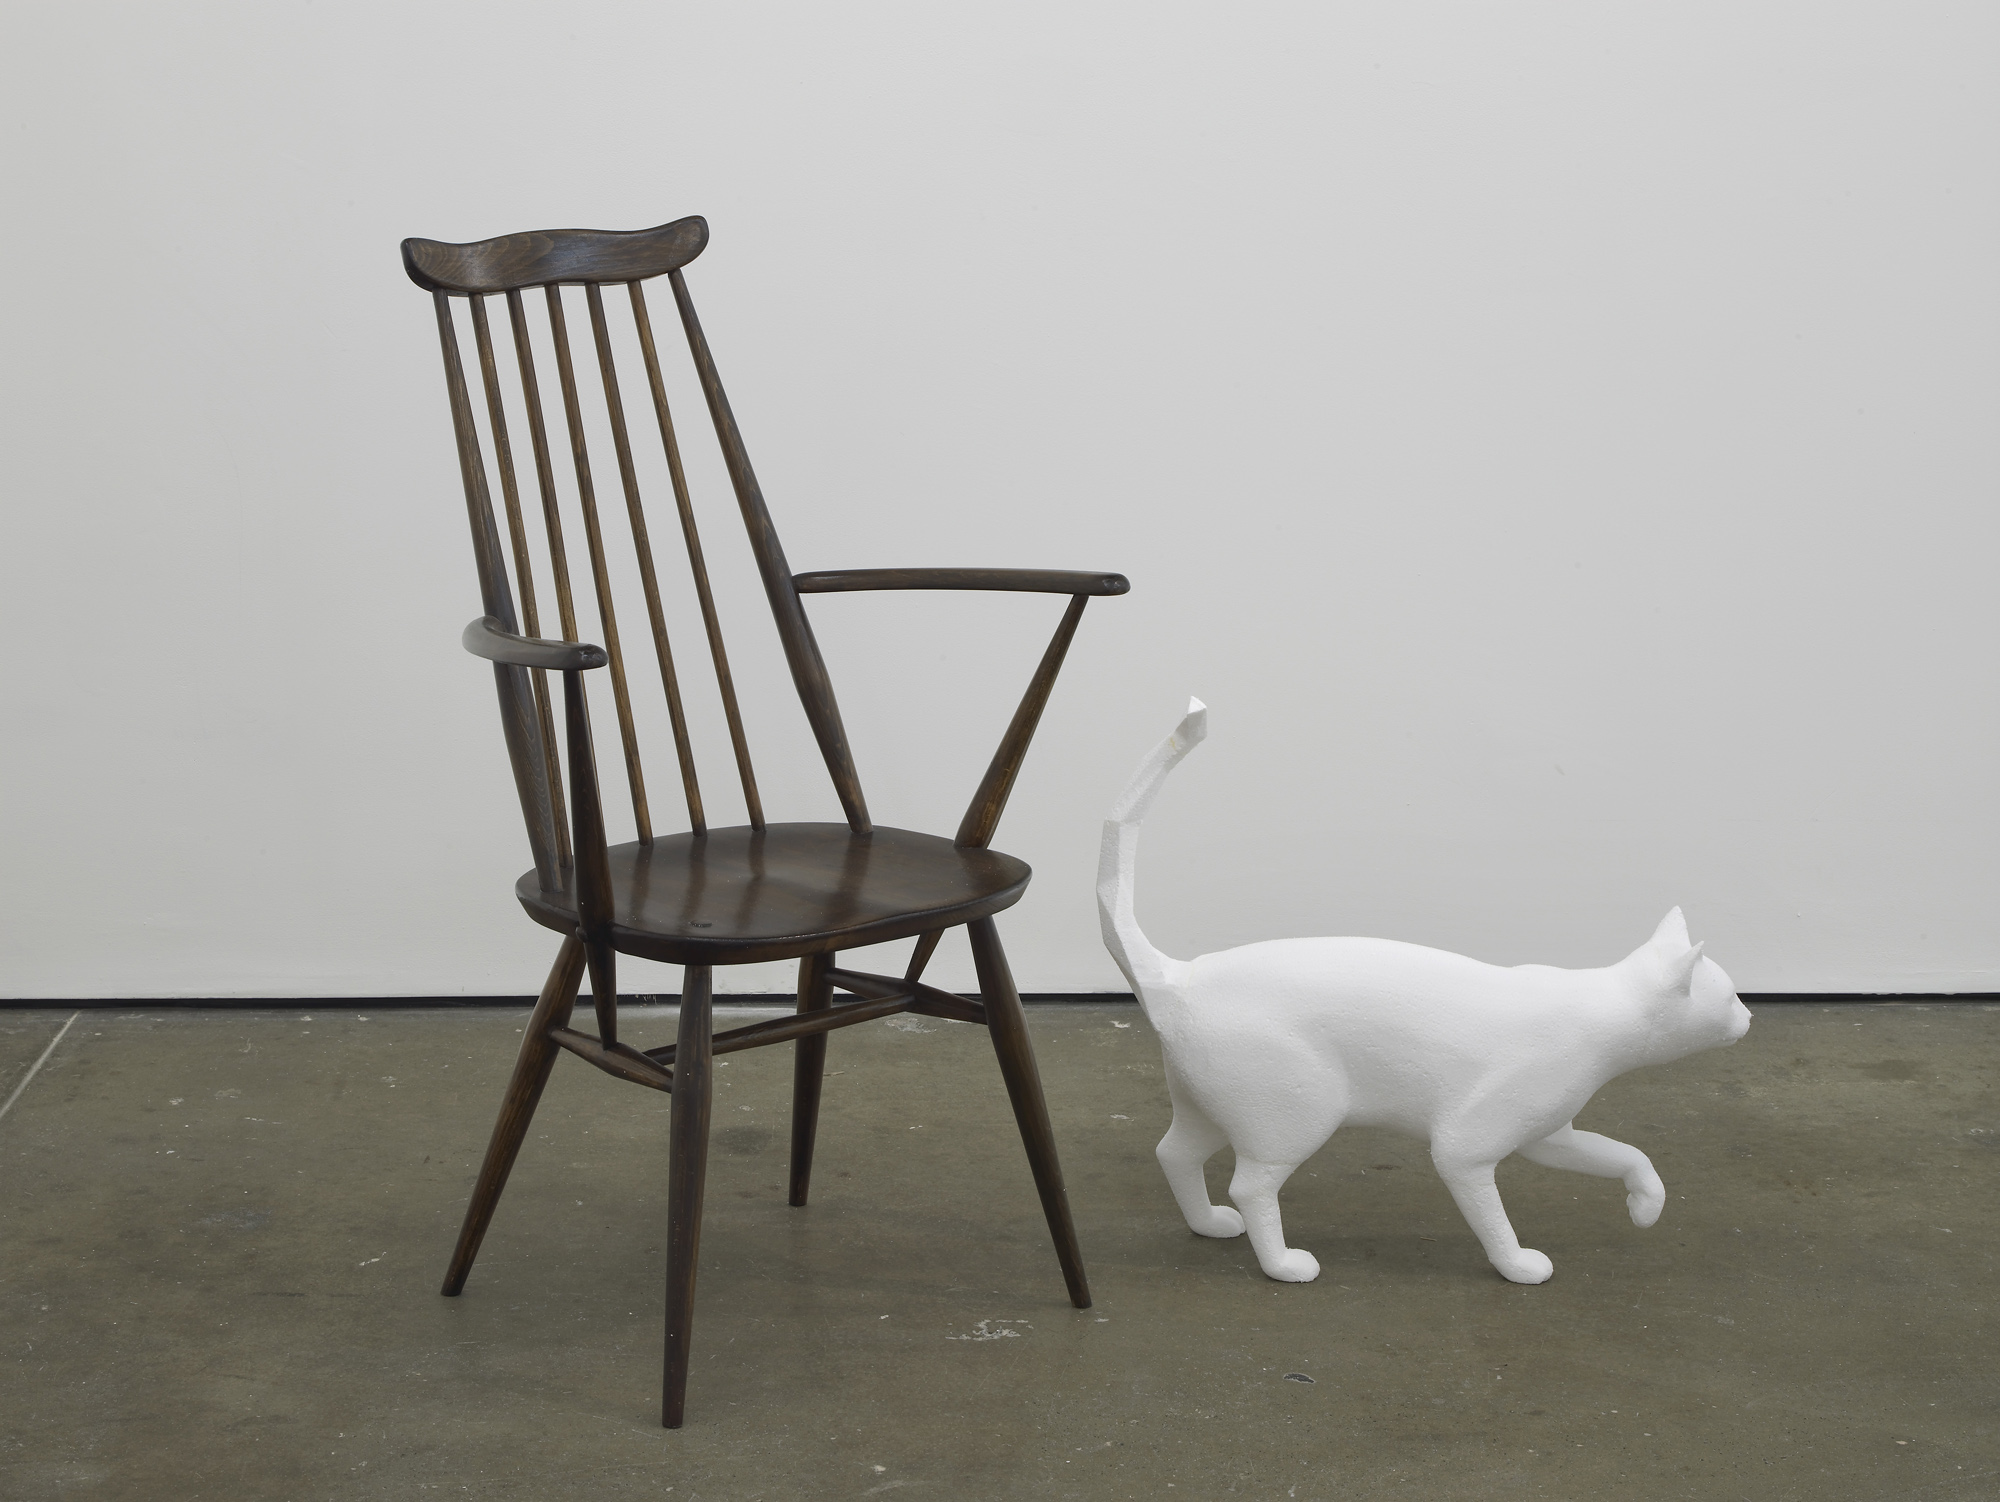     Walking Cat&nbsp;  2014  Polystyrene and 20th century Windsor chair  195 x 150 x 65 cm / 76.7 x 59 x 25.5 in 